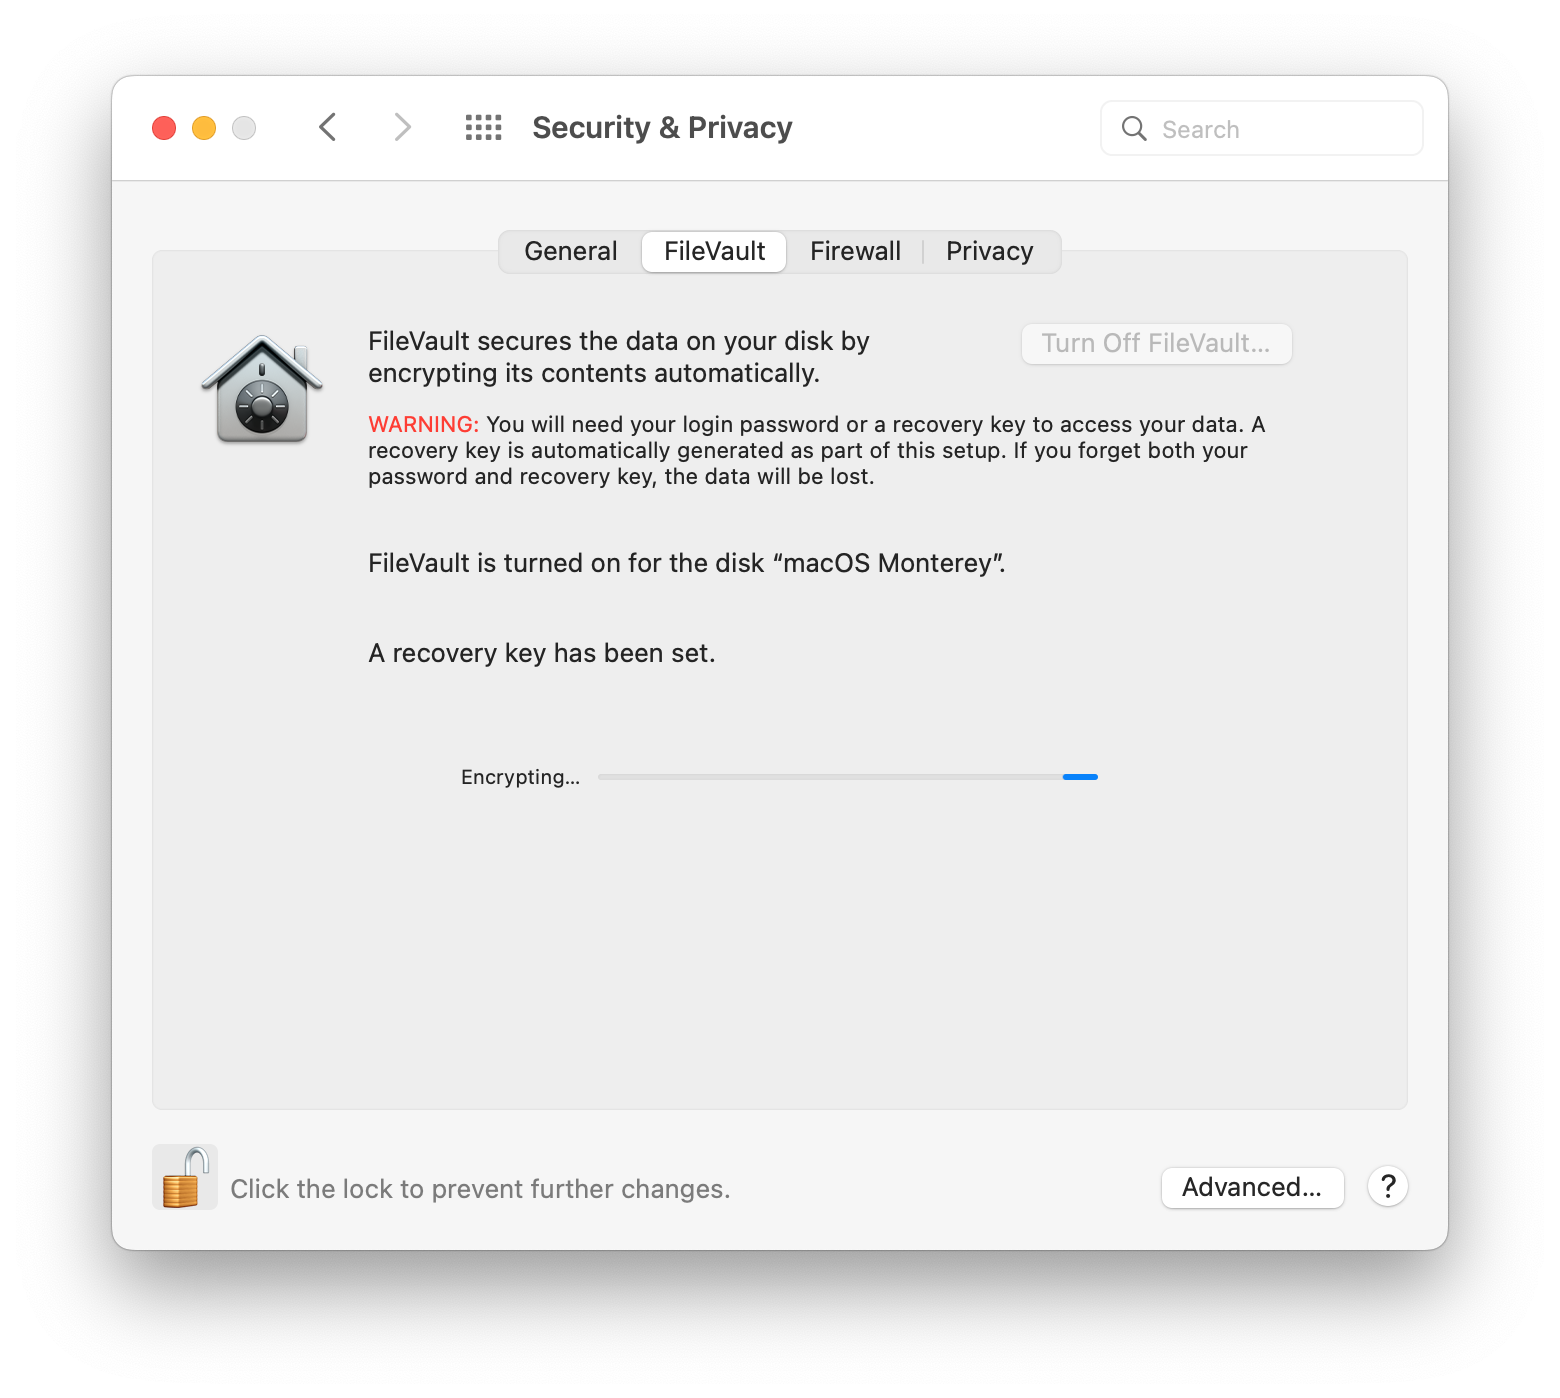 FileVault secures the data on your disk